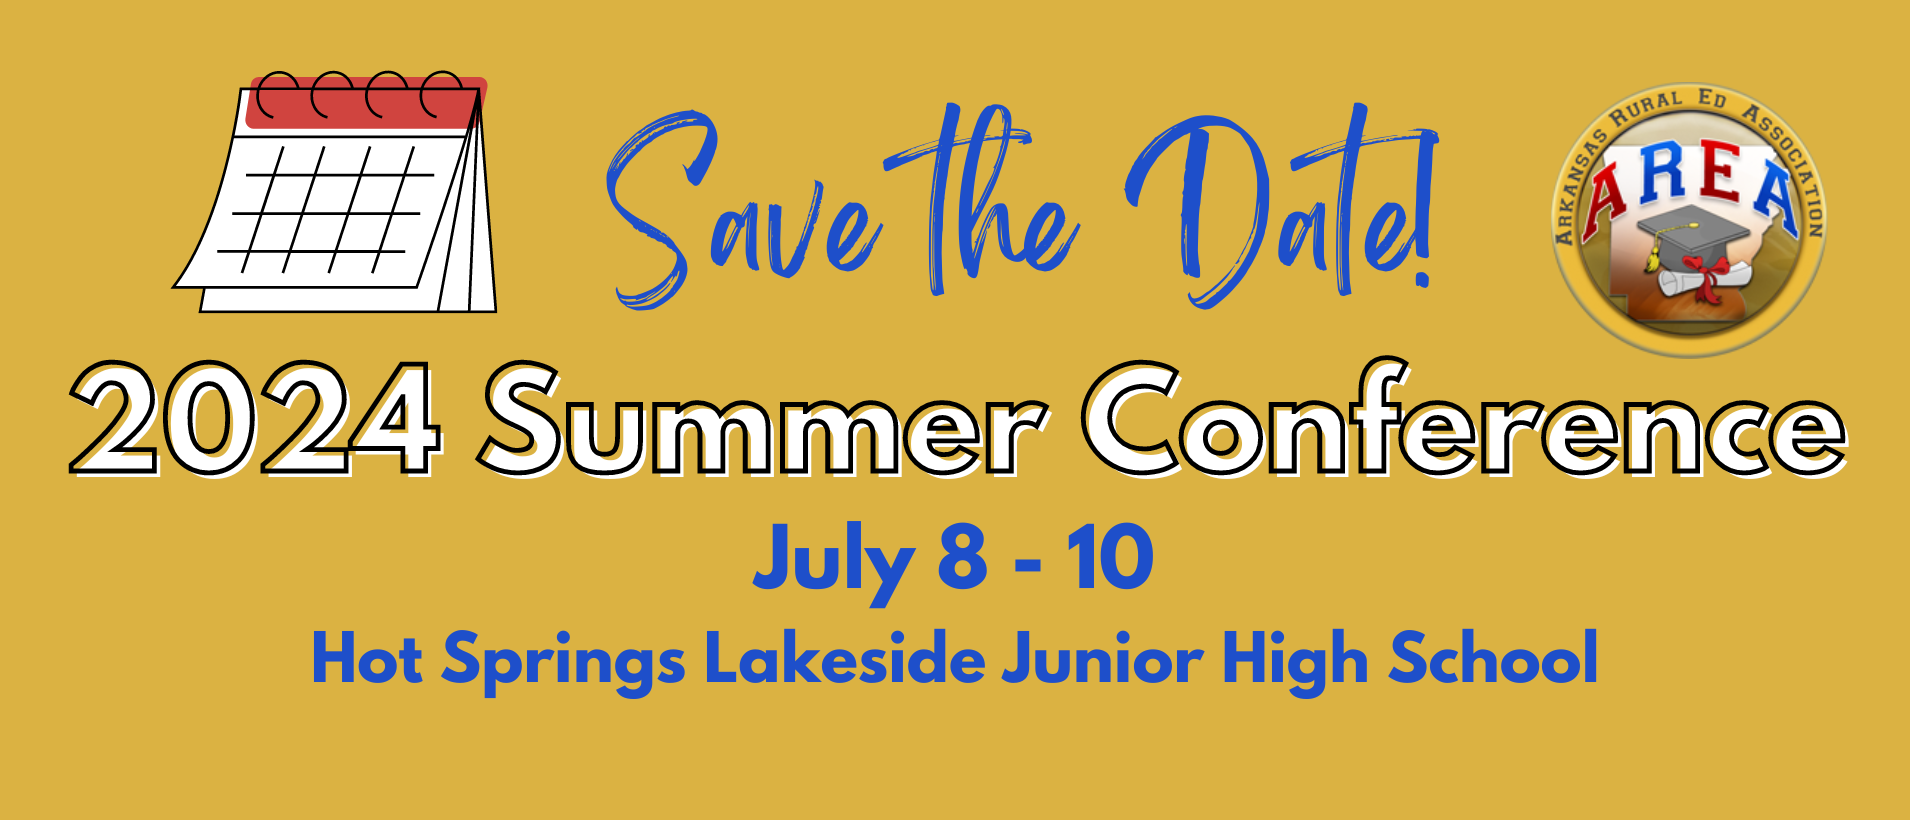 Summer Conference July 8-10, 2024